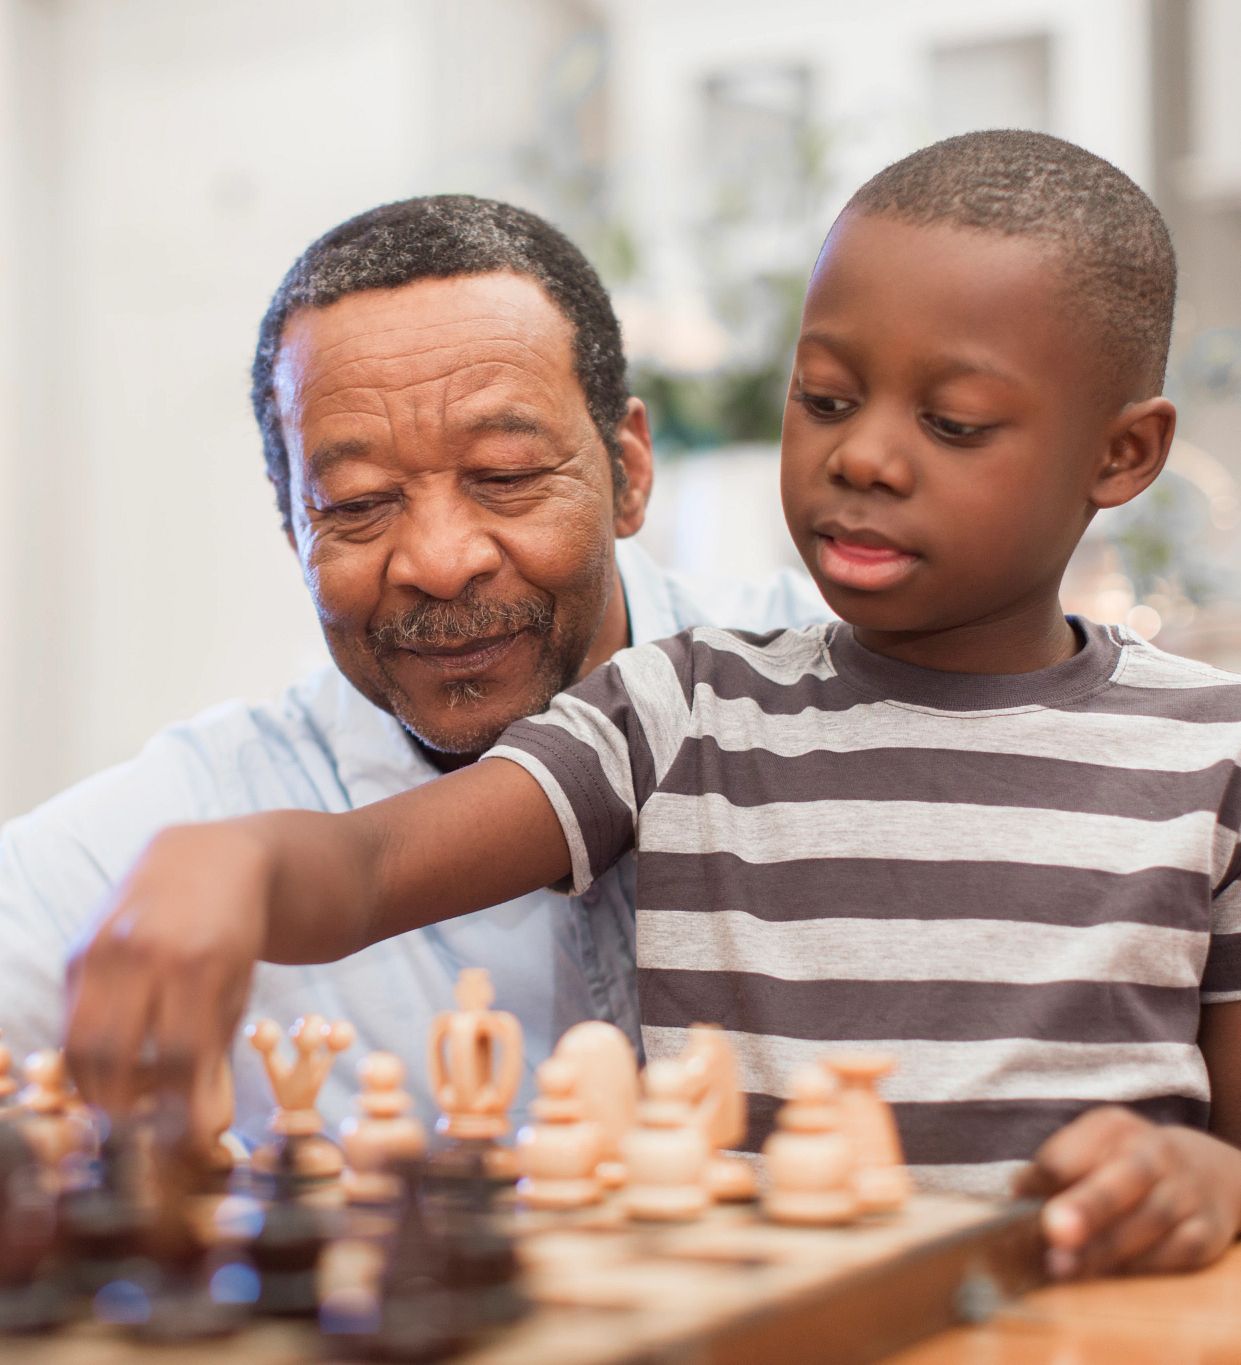 Image of a grandpa and grandson playing chess together